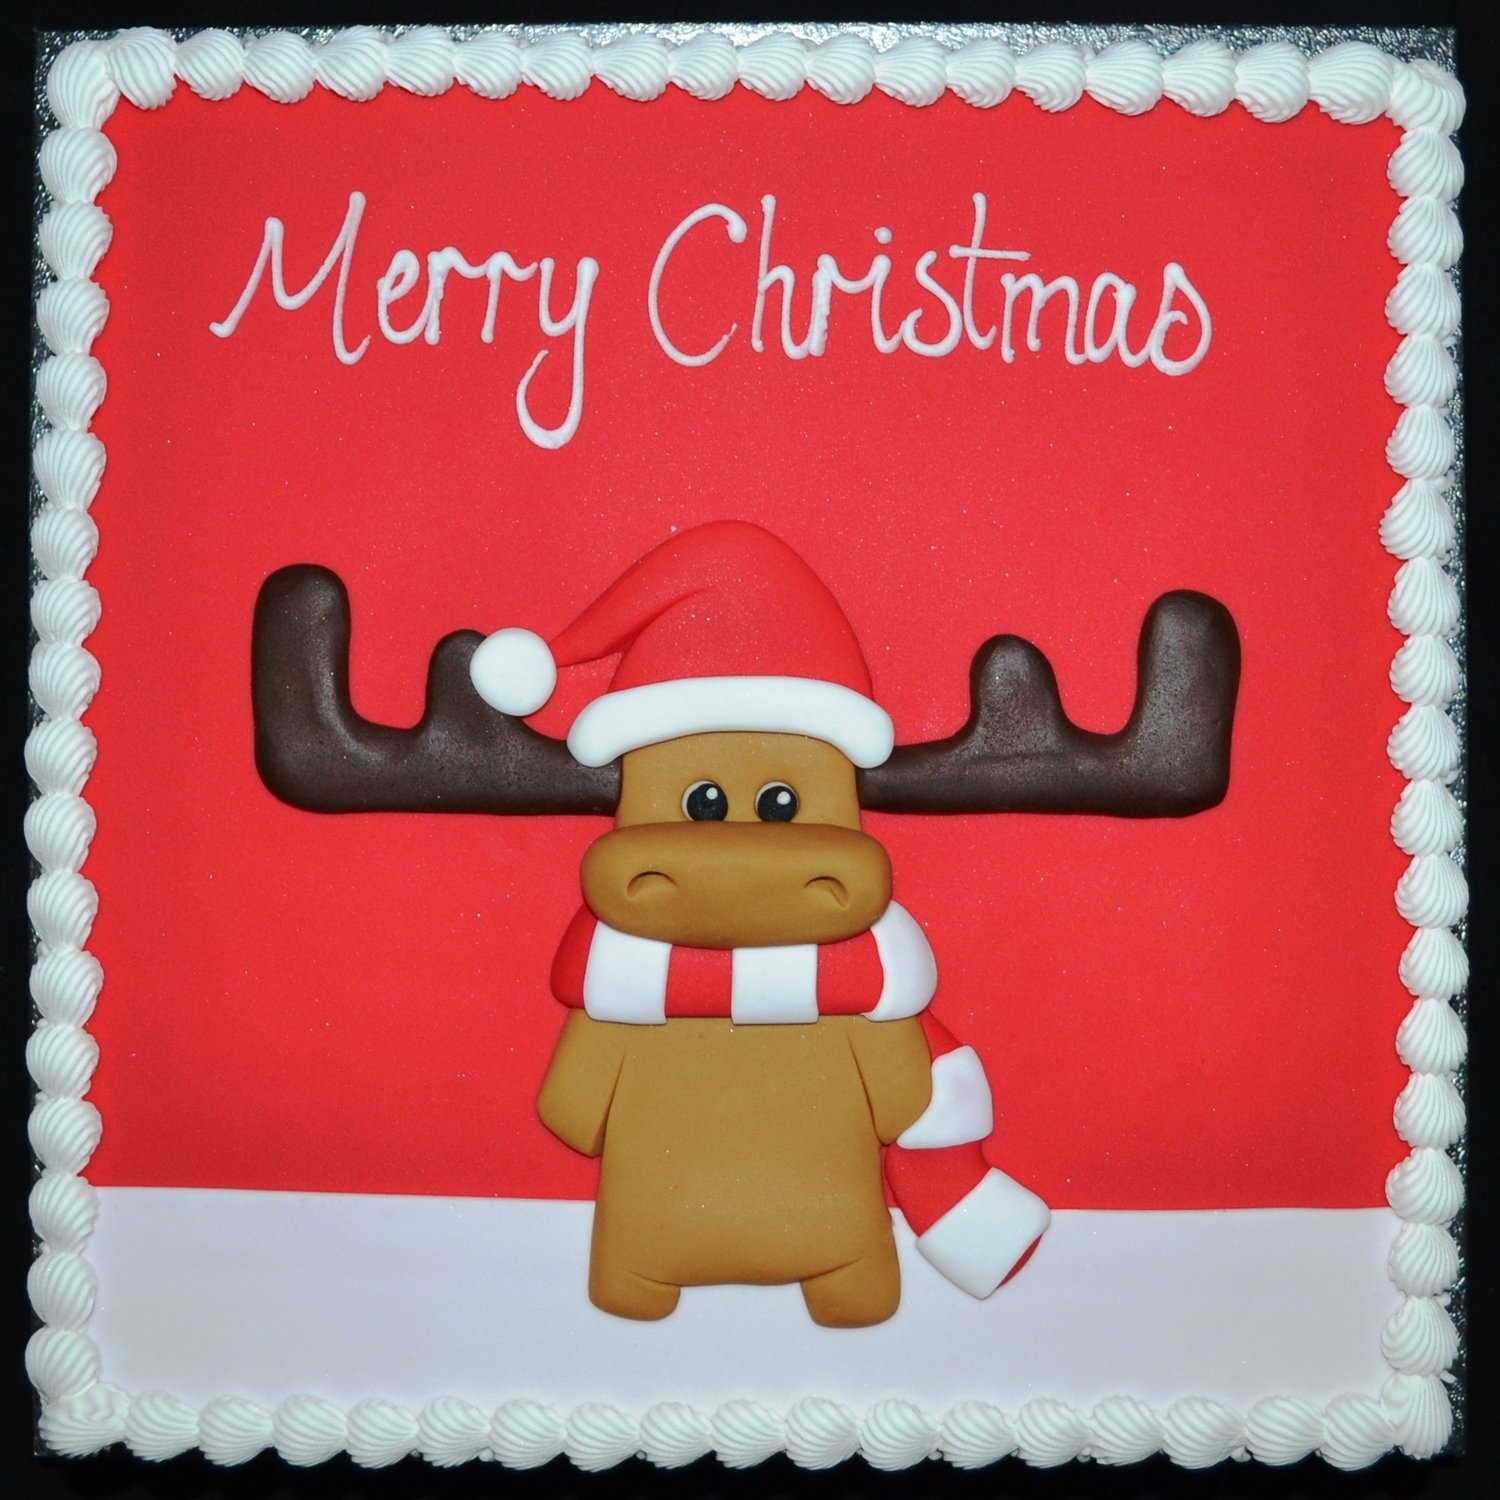 Square Cake with Christmas Moose Scene